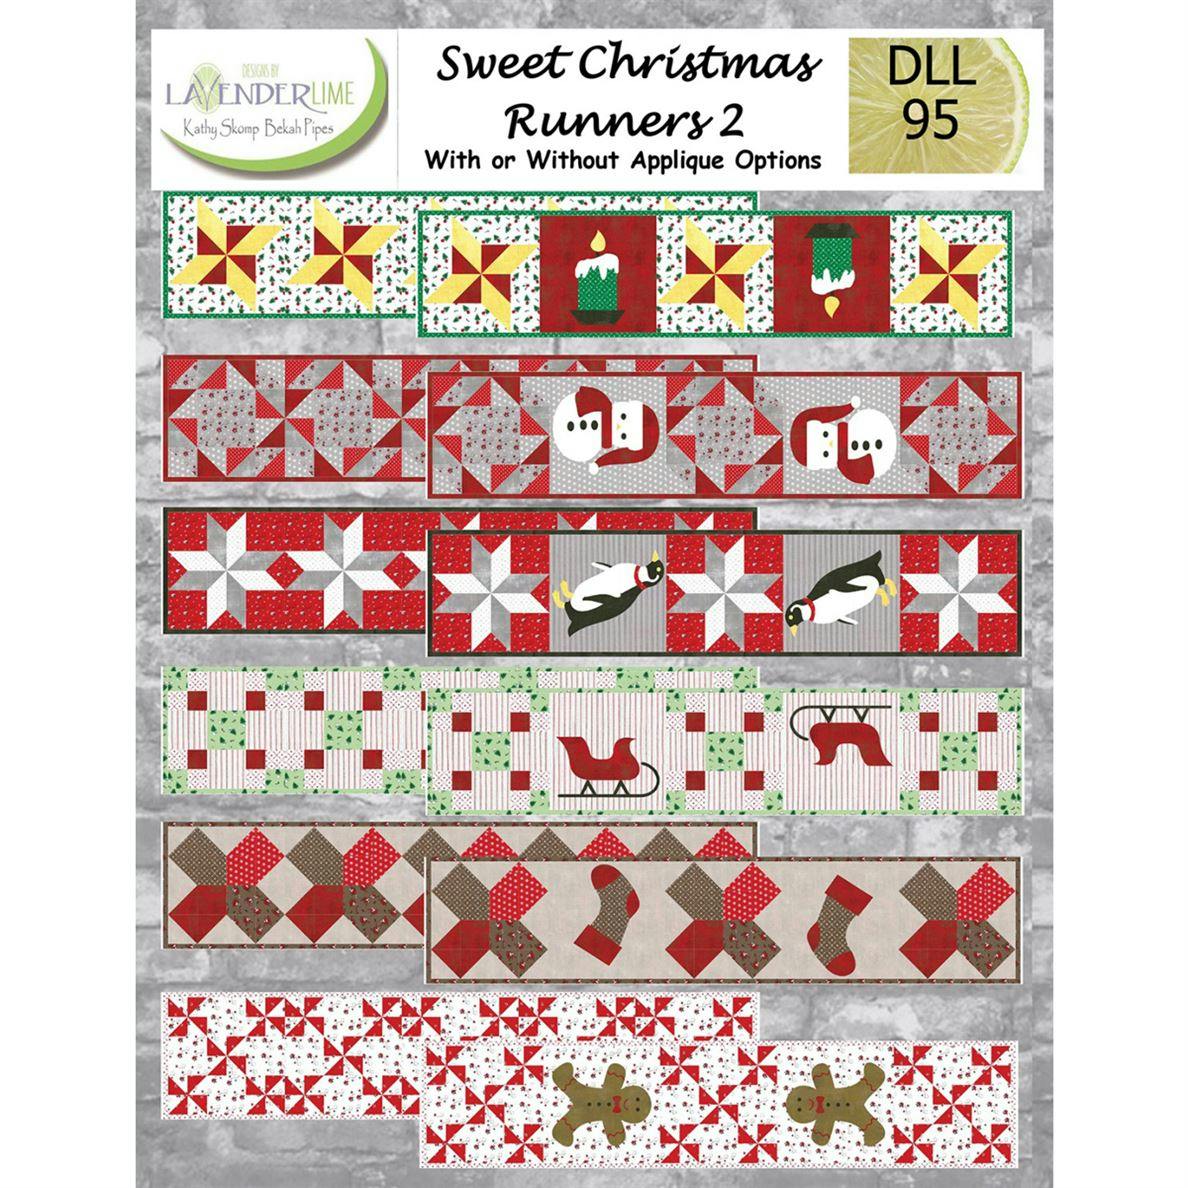 Sweet Christmas Table Runners book